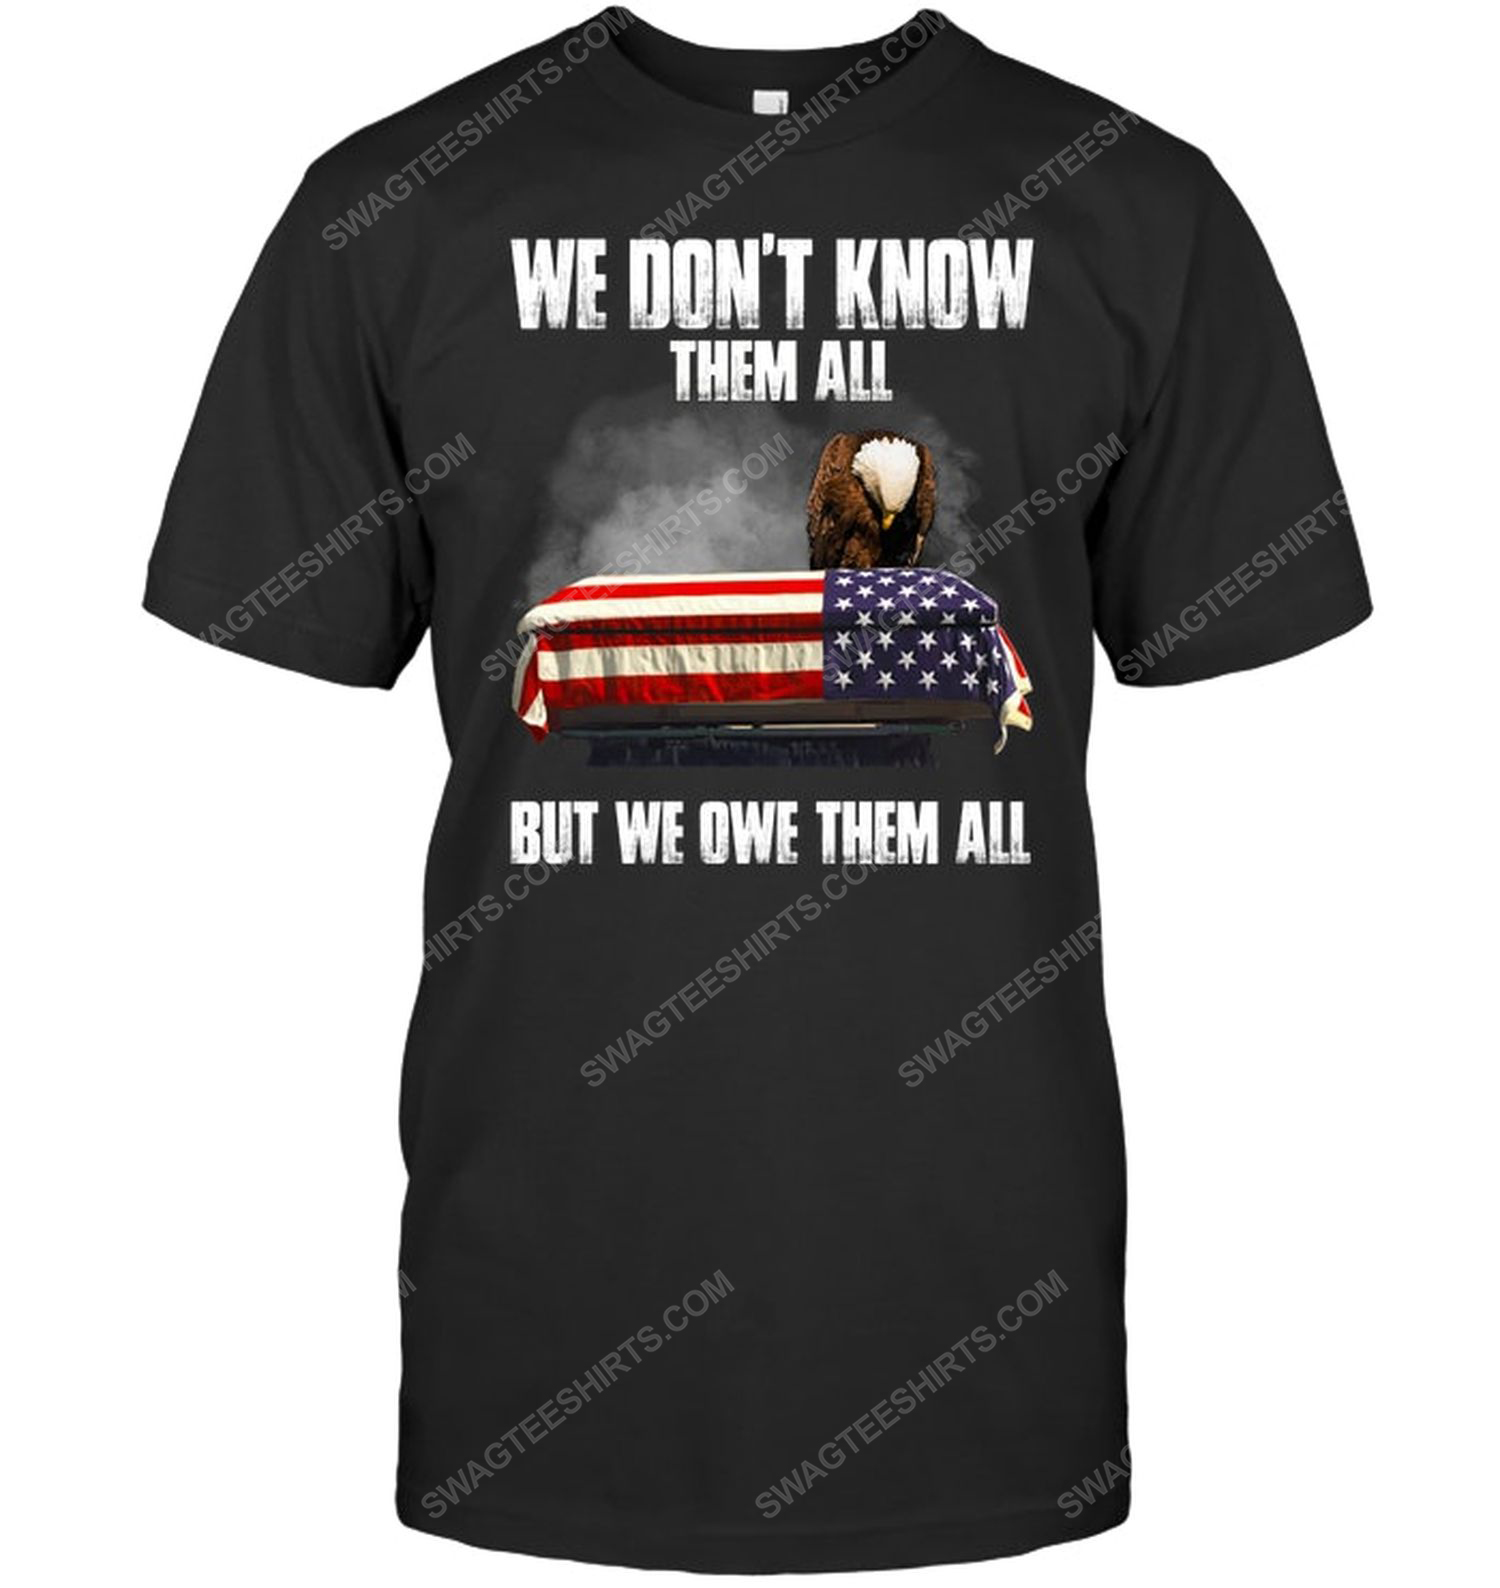 We don't know them all but we owe them all political tshirt